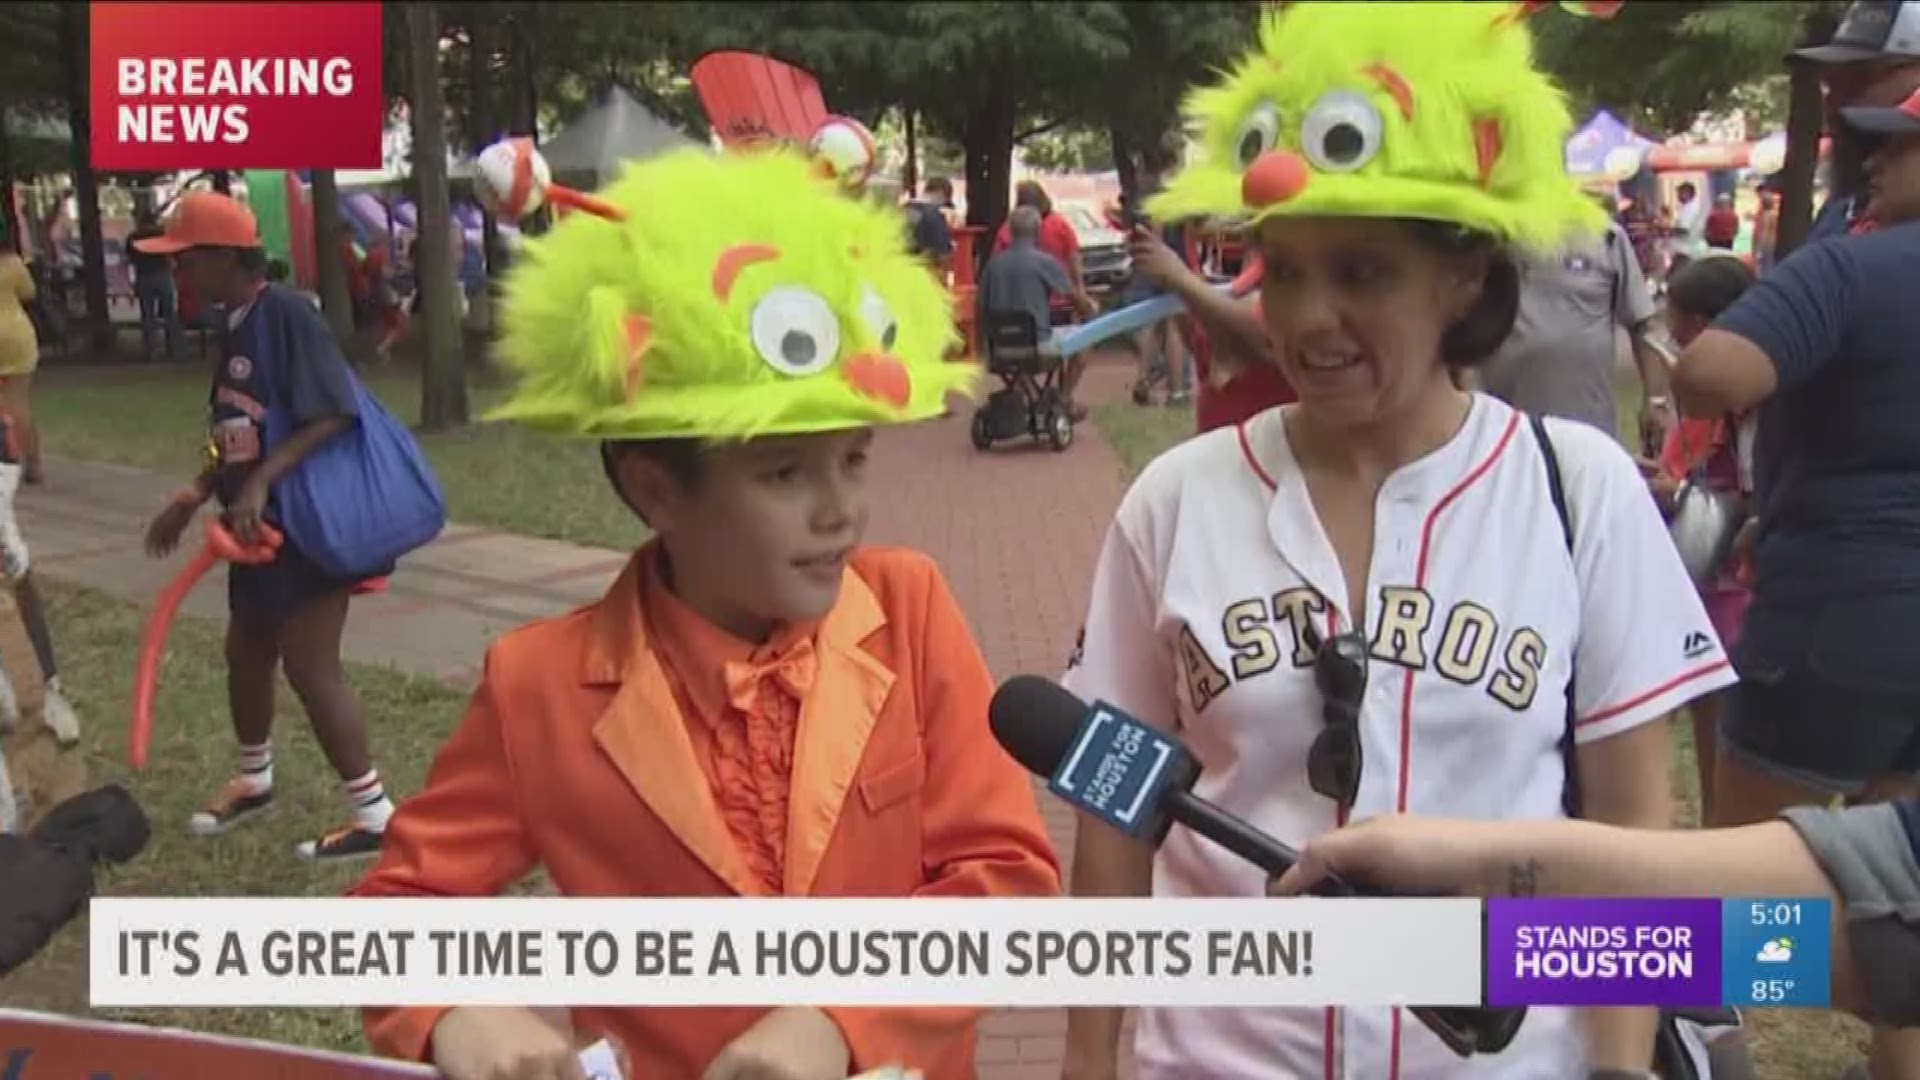 The Houston Astros swept the Cleveland Indians Monday to advance to the ALCS, and fans are stoked!